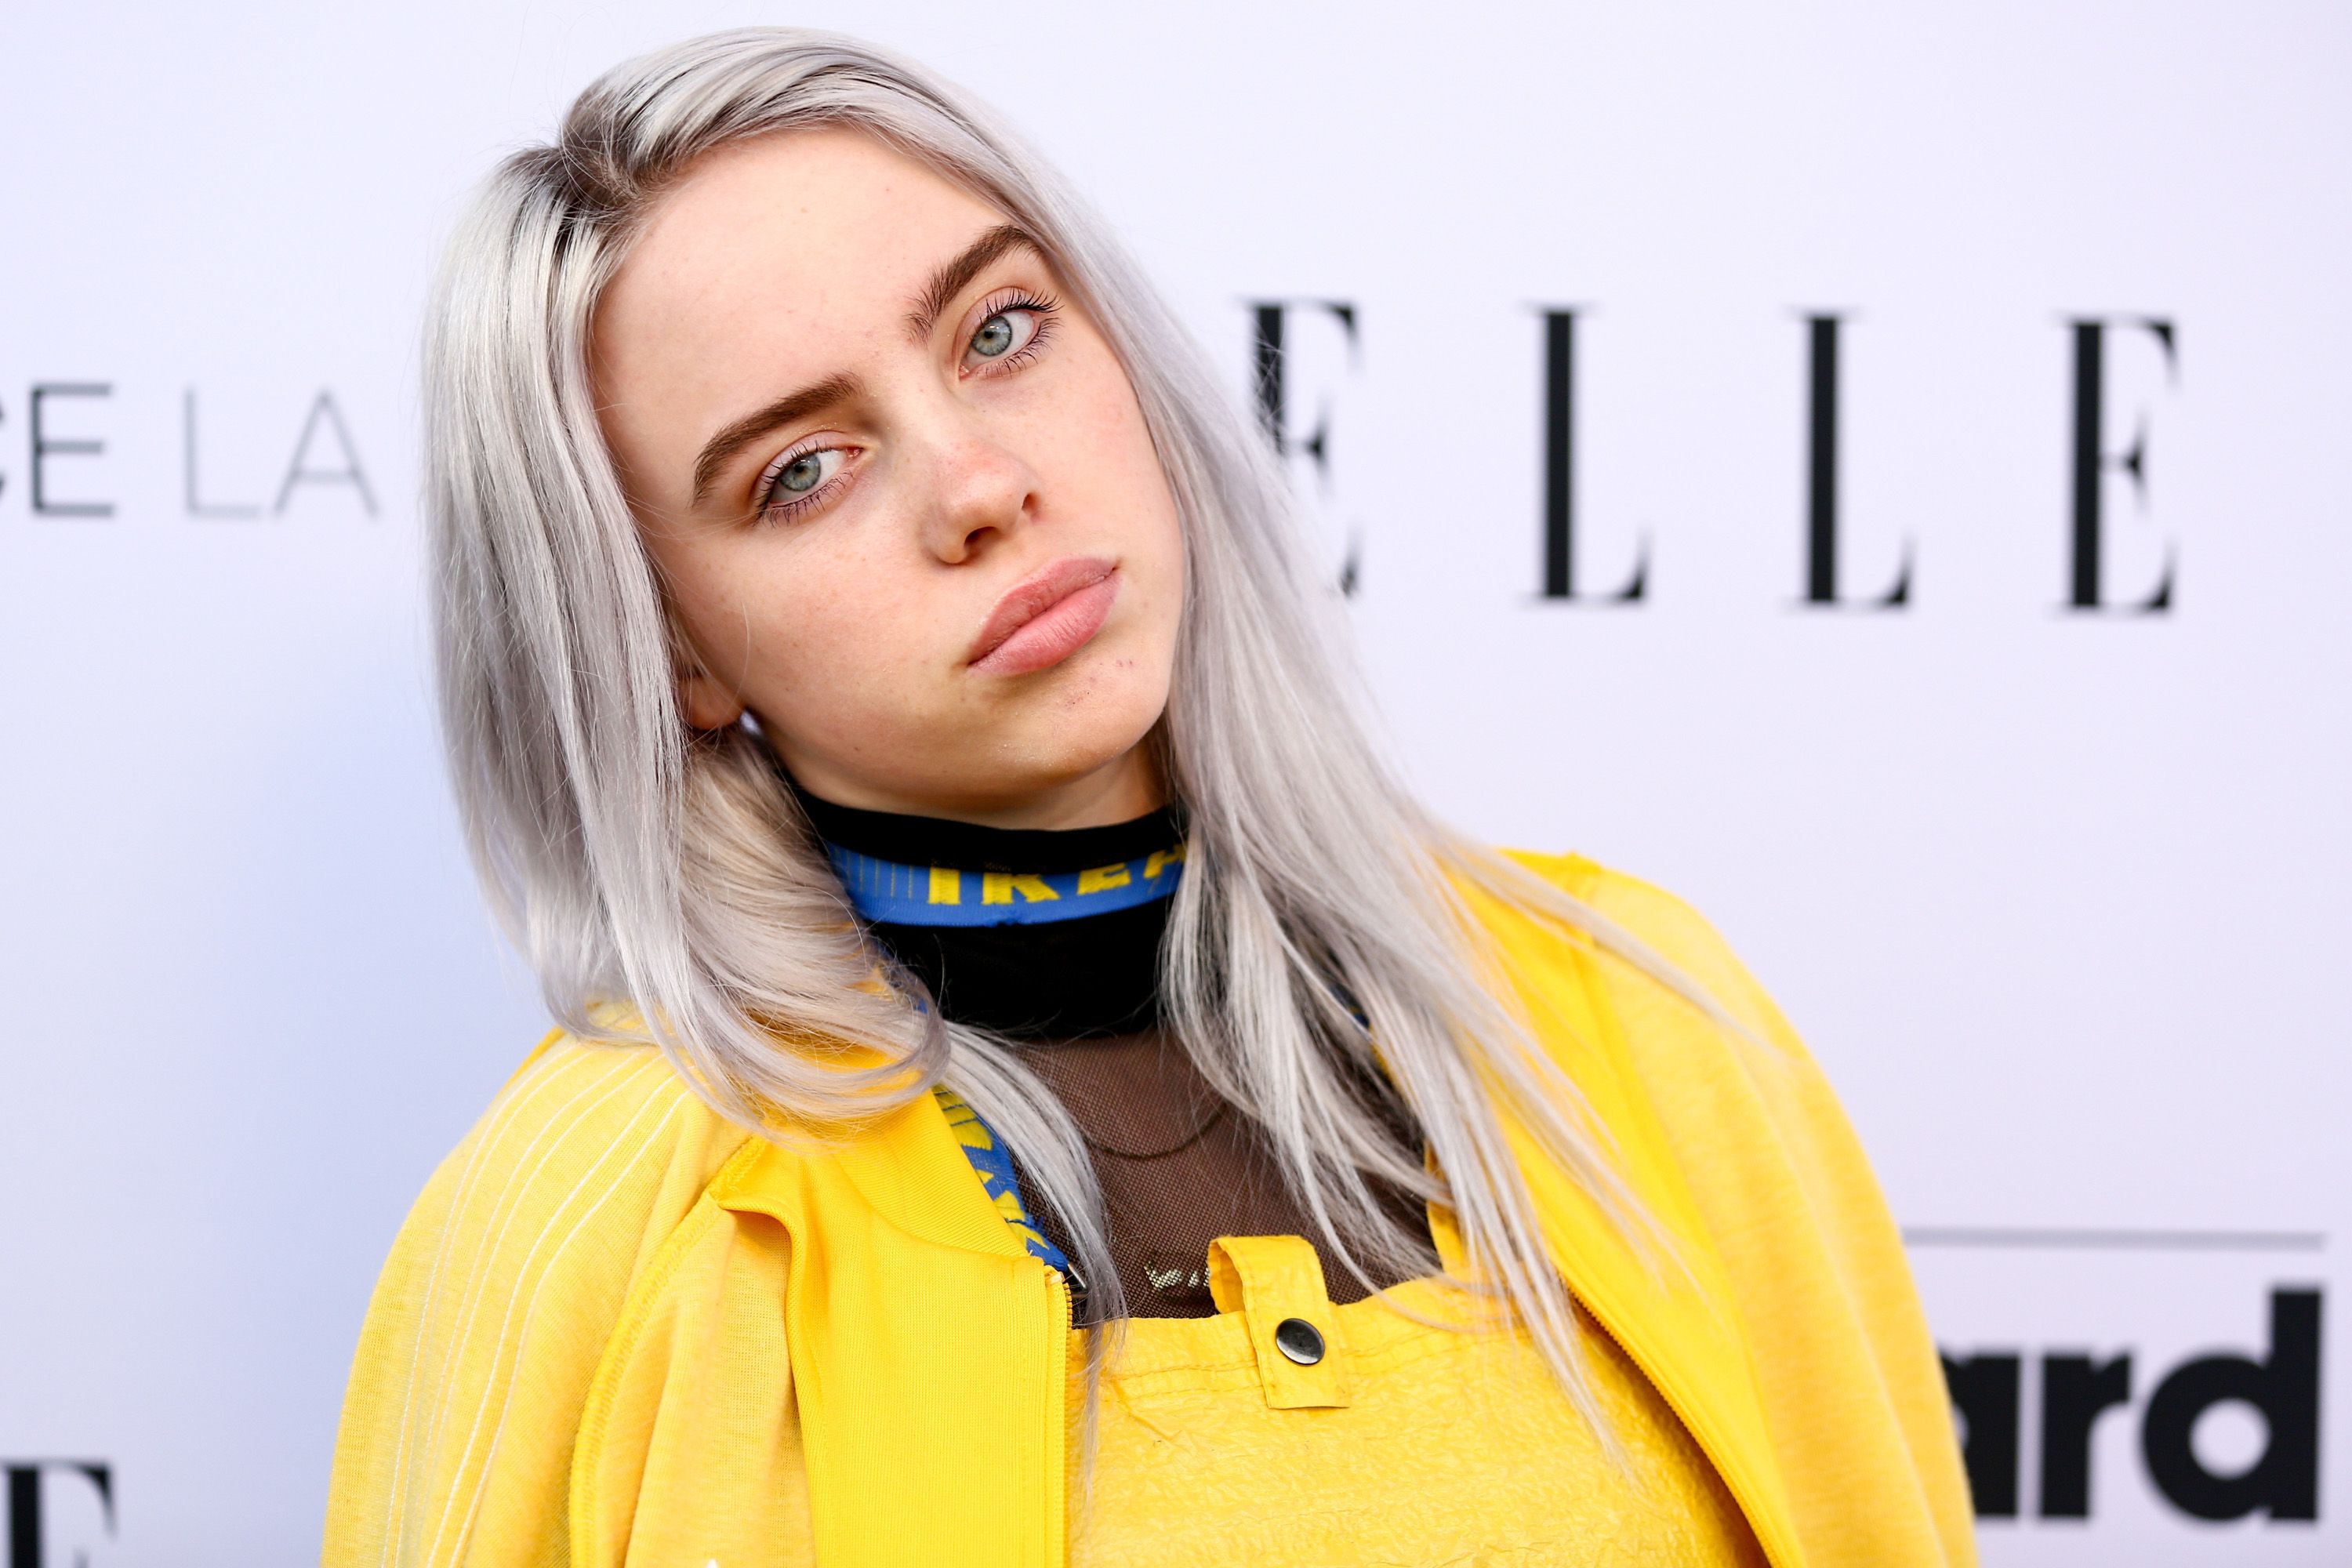 Billie Eilish is the first artist born in the 2000s to have a No